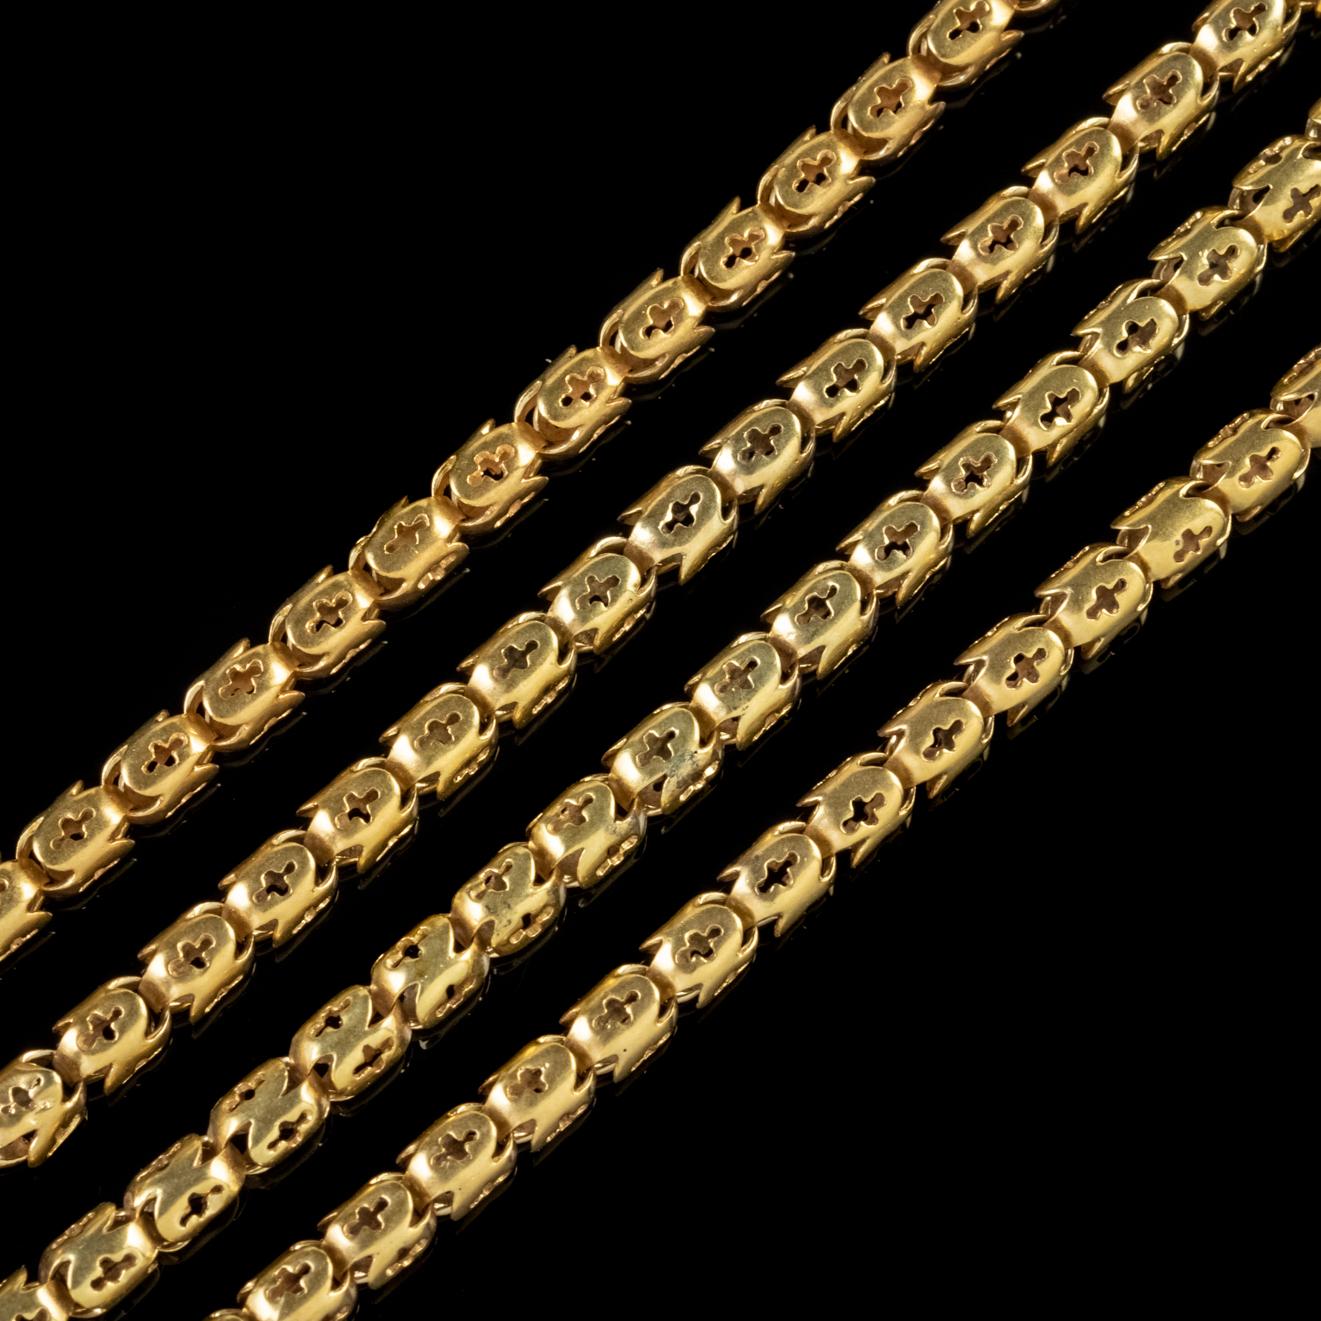 Late Victorian Antique Victorian Guard Chain 18 Carat Gold on Silver Link Necklace, circa 1880 For Sale